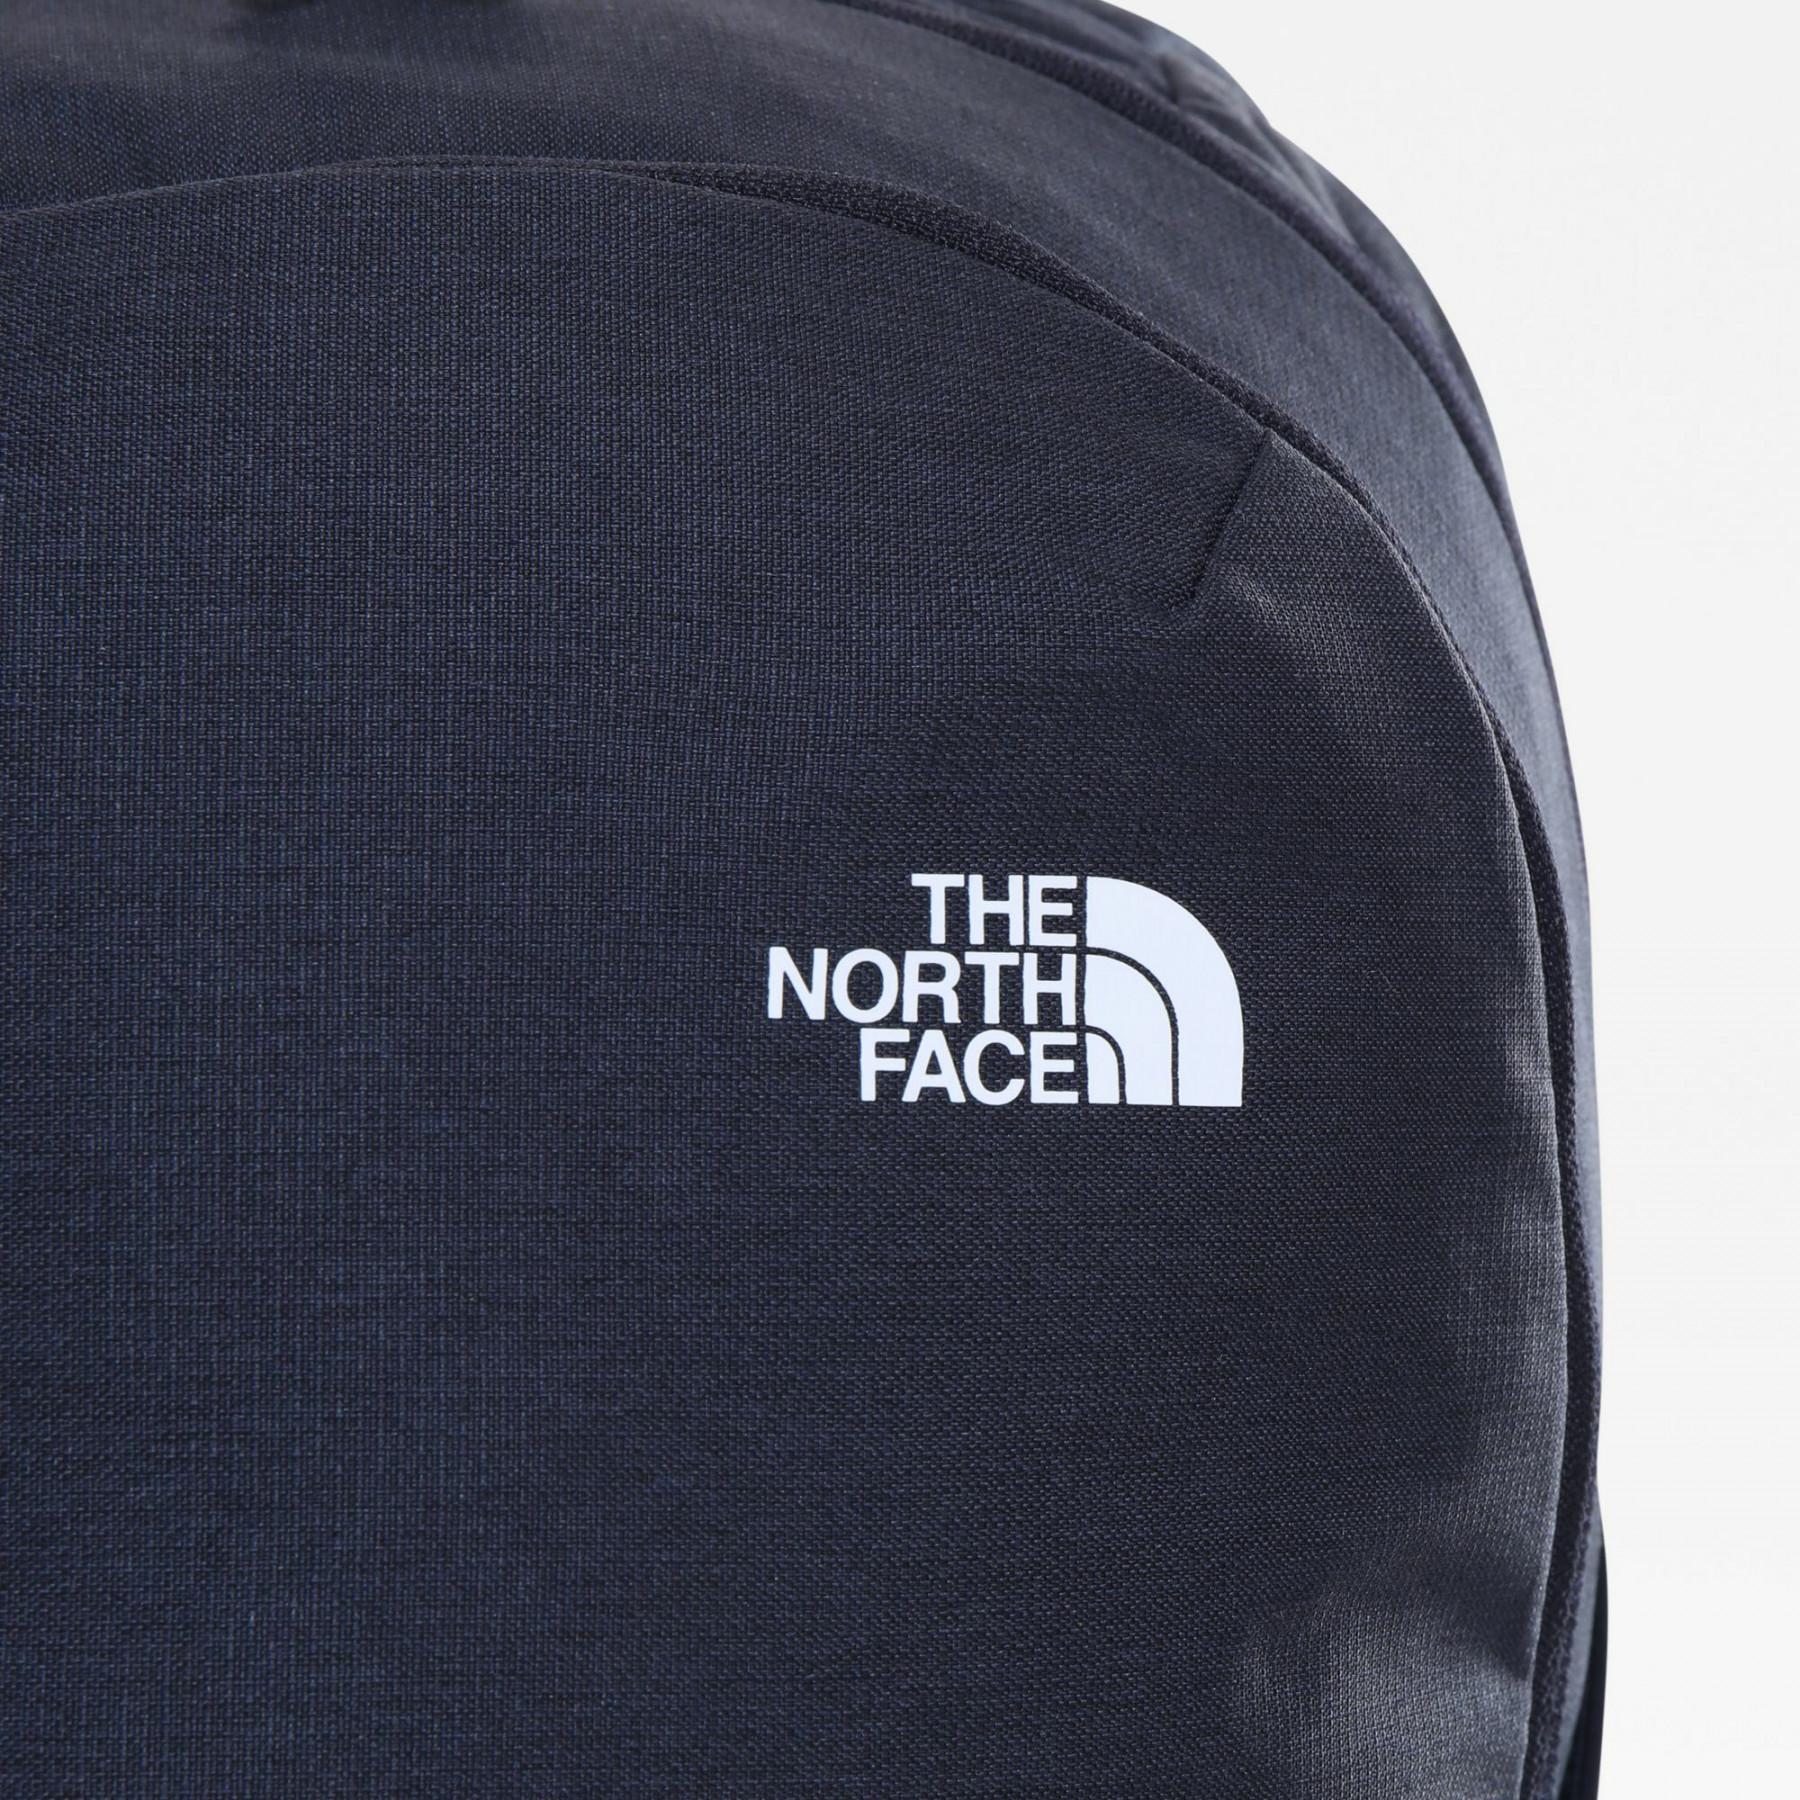 Sac à dos femme The North Face Isabella